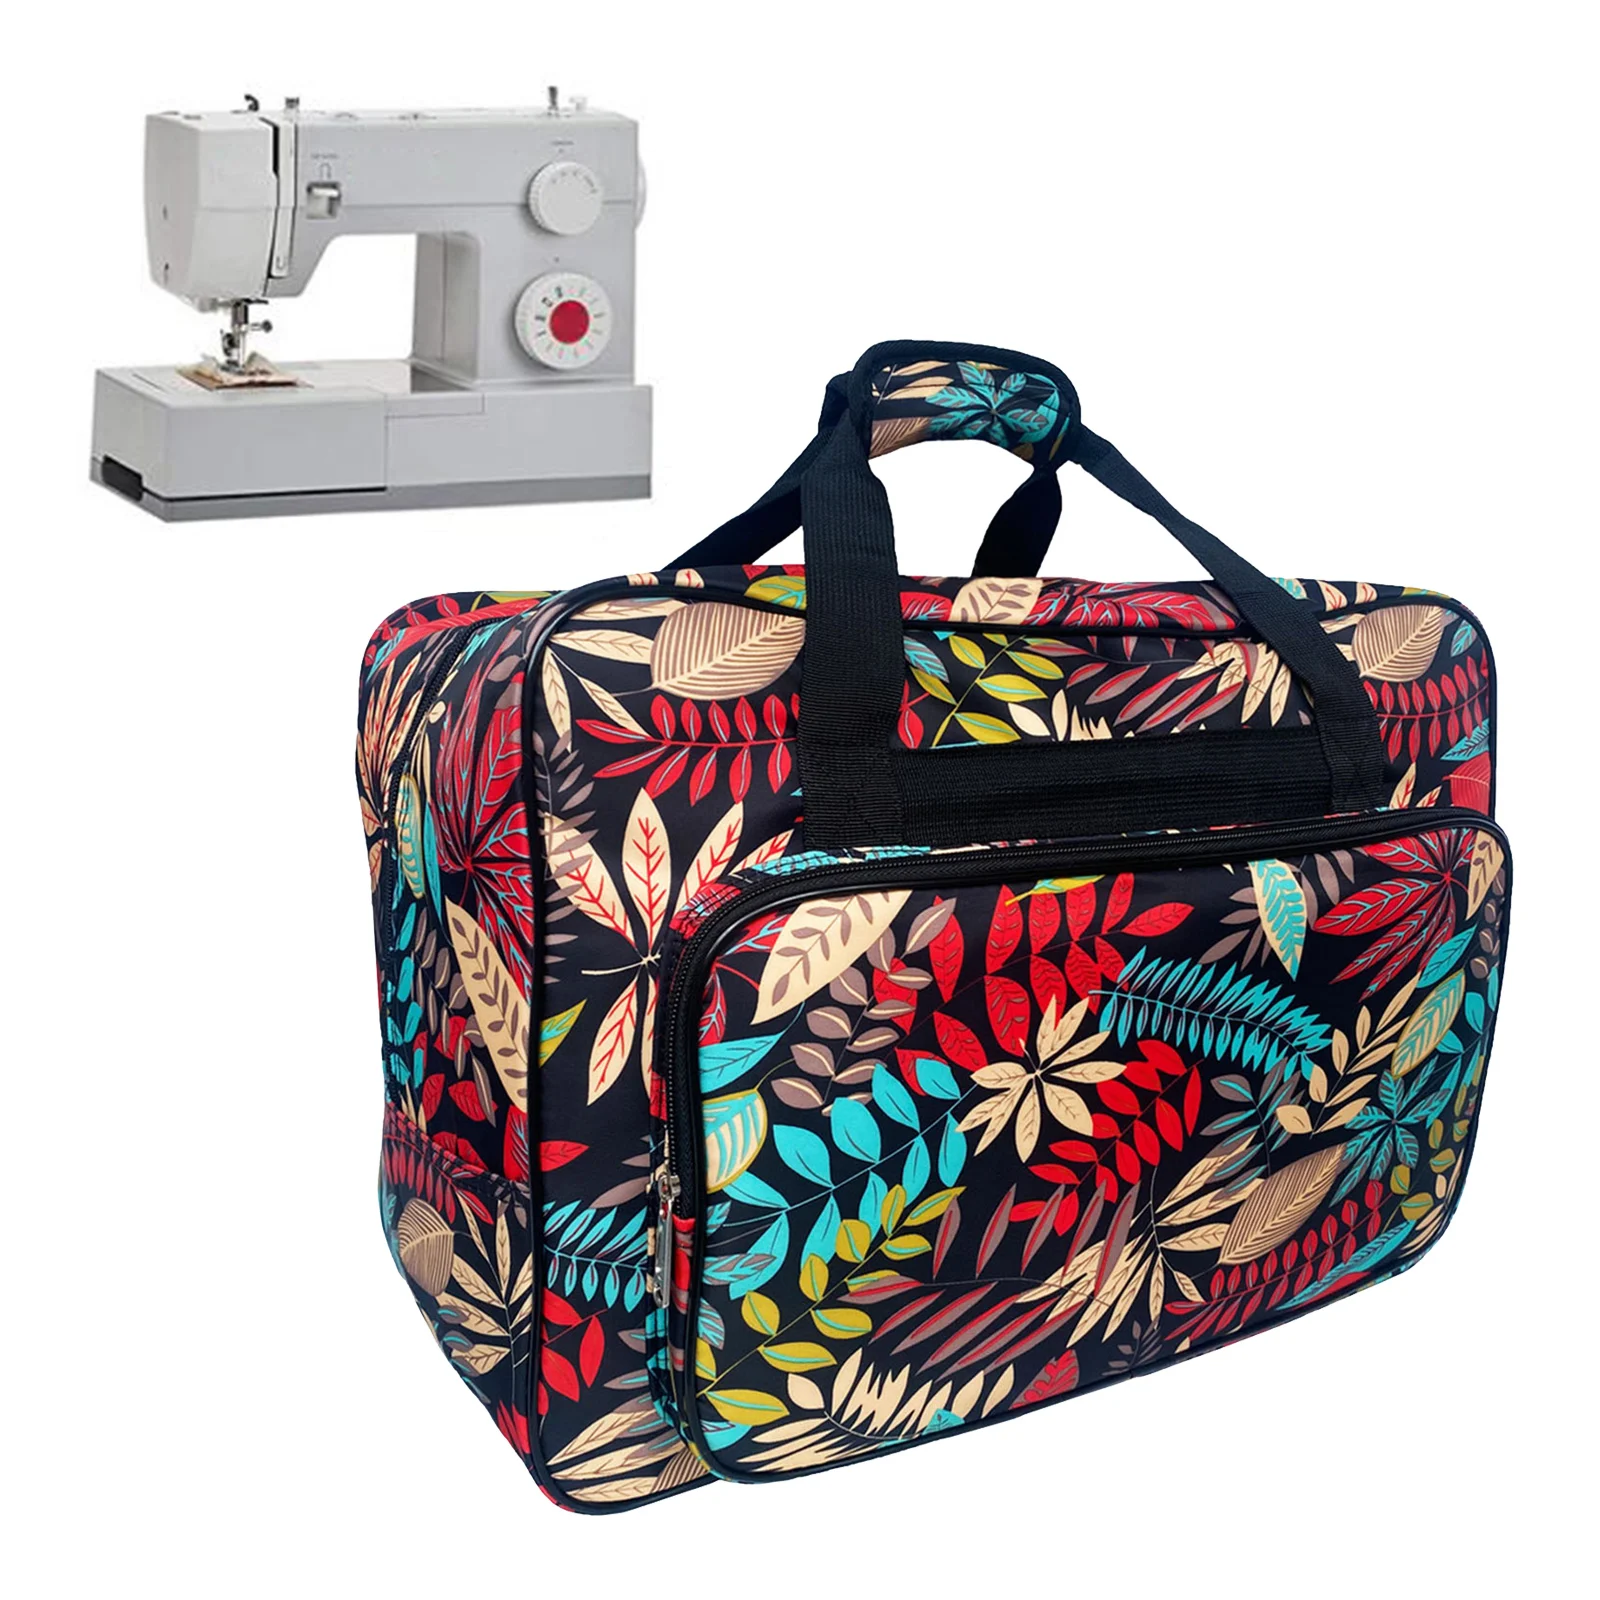 Nylon Sewing Machine Carry Bag 46x23x32cm Lightweight Large Capacity Handbag Travel Tote Tools Pouch Pockets Carrier Pack